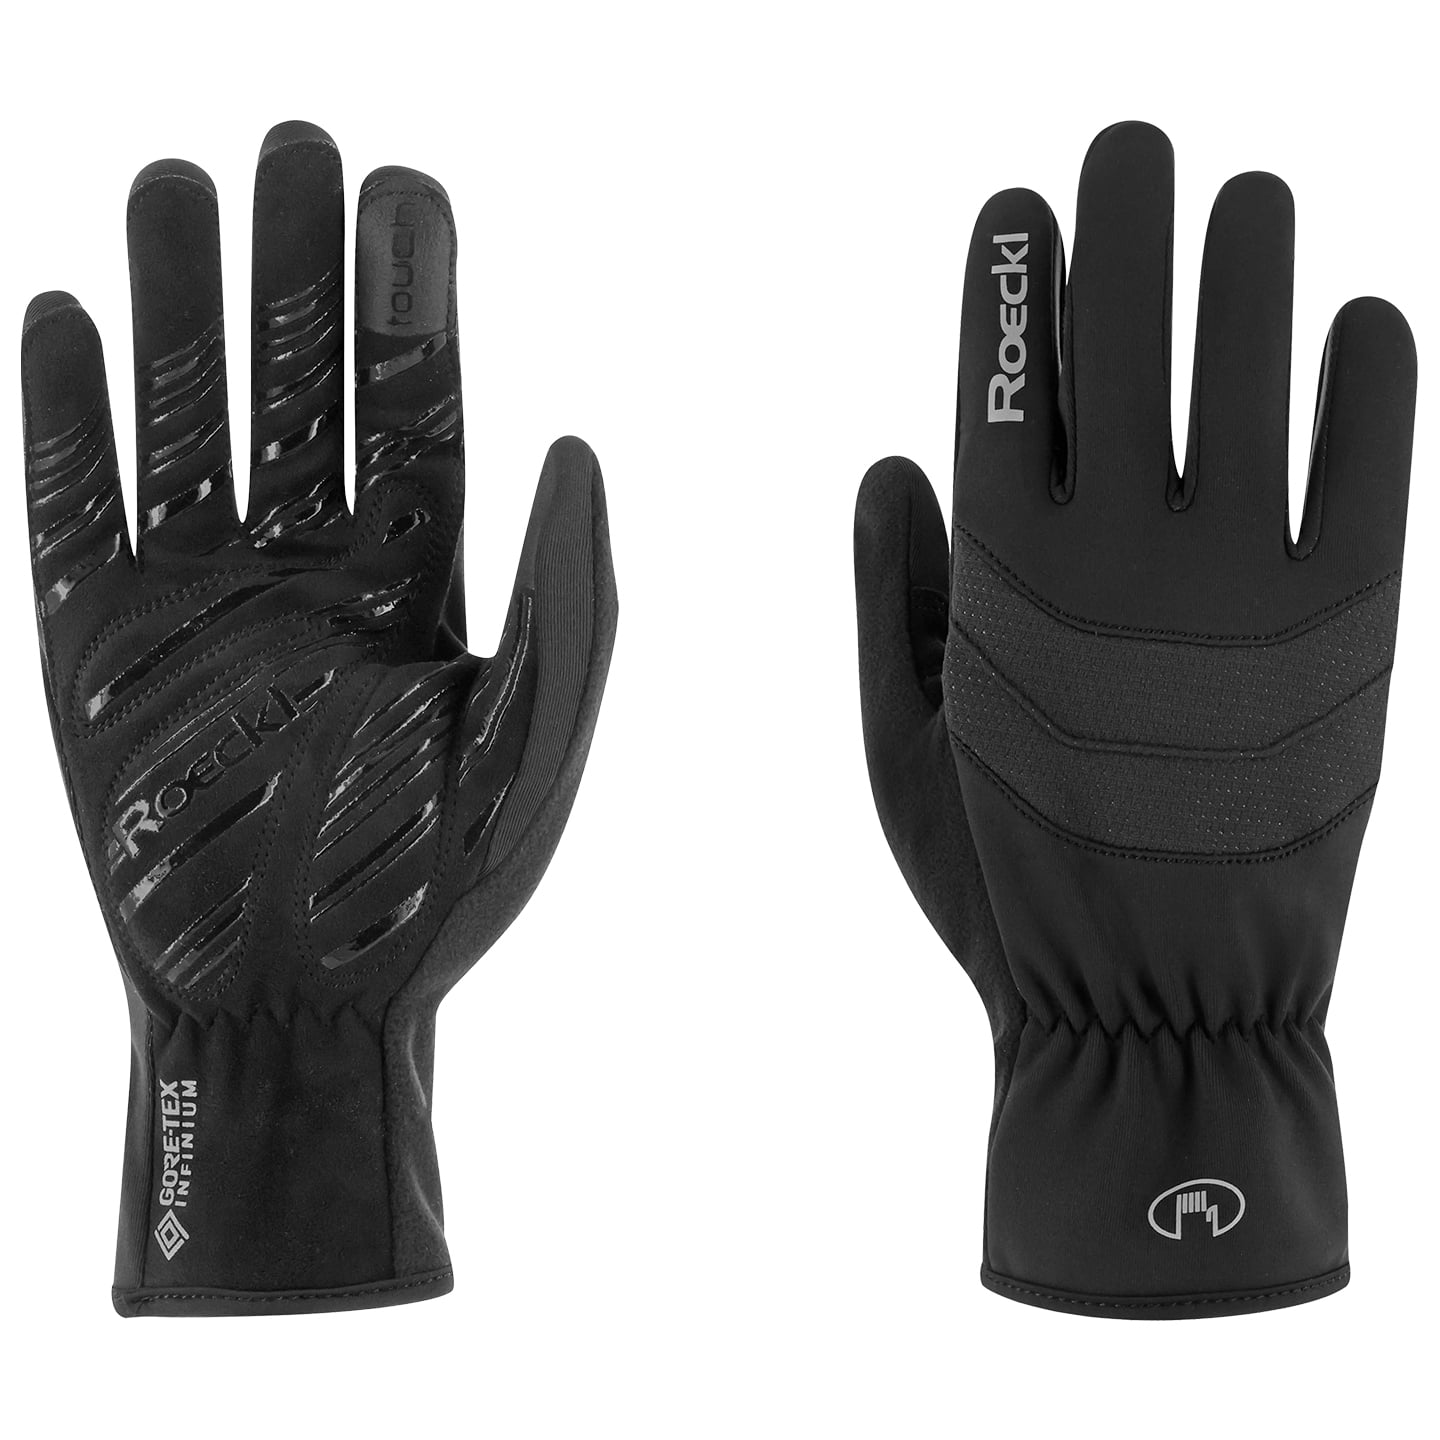 ROECKL Raiano Winter Gloves Winter Cycling Gloves, for men, size 10,5, Bike gloves, Bike clothing